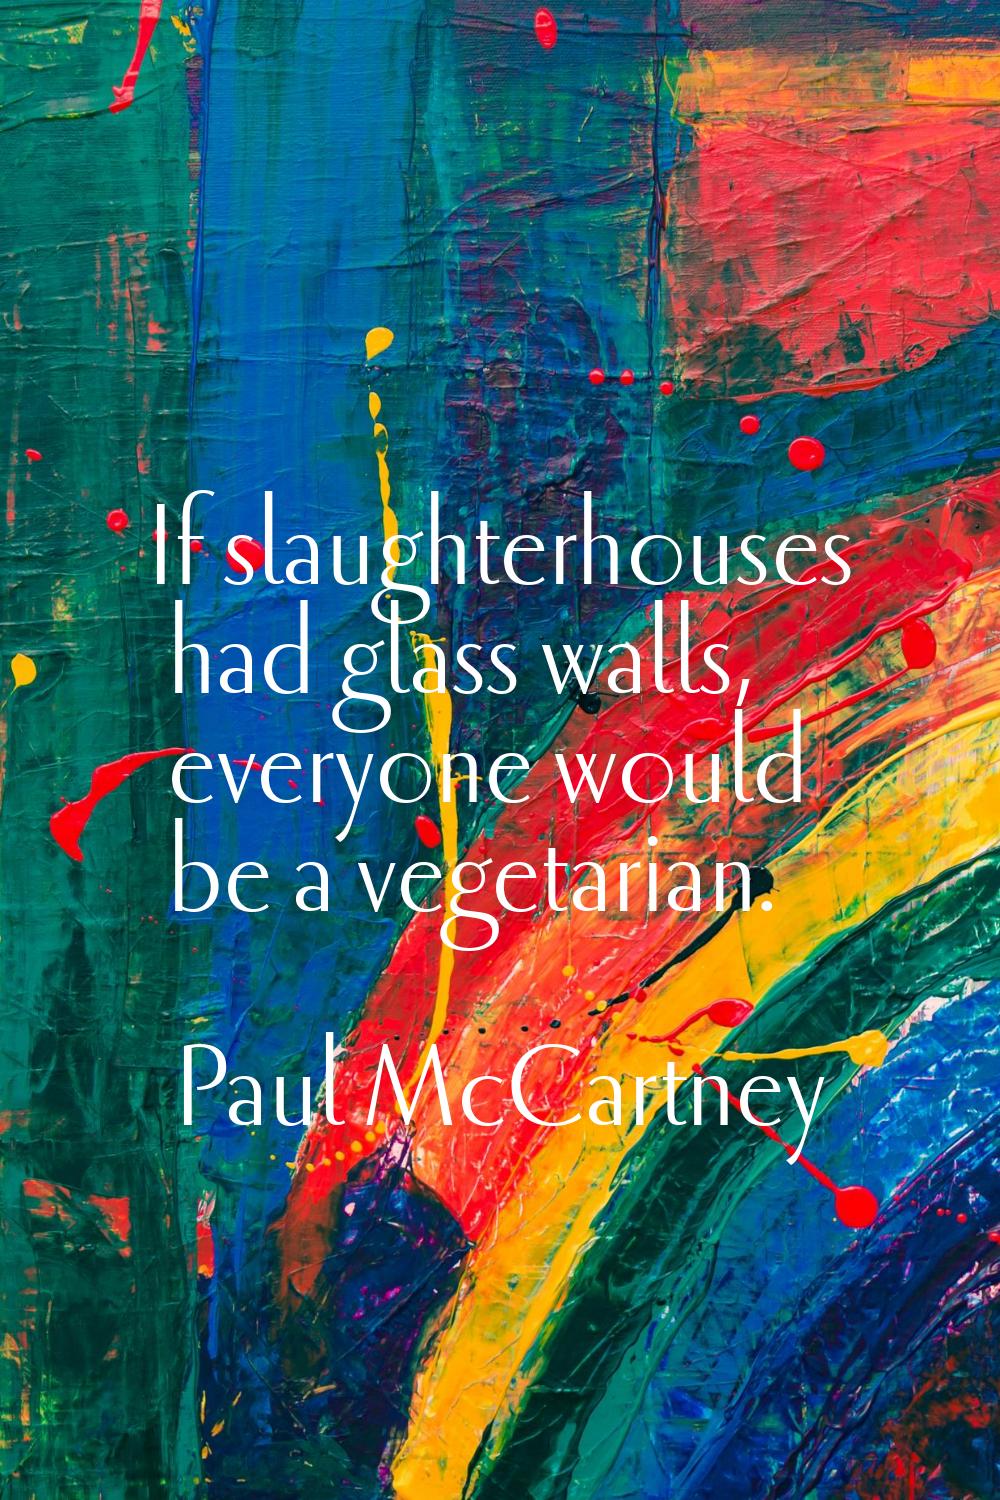 If slaughterhouses had glass walls, everyone would be a vegetarian.